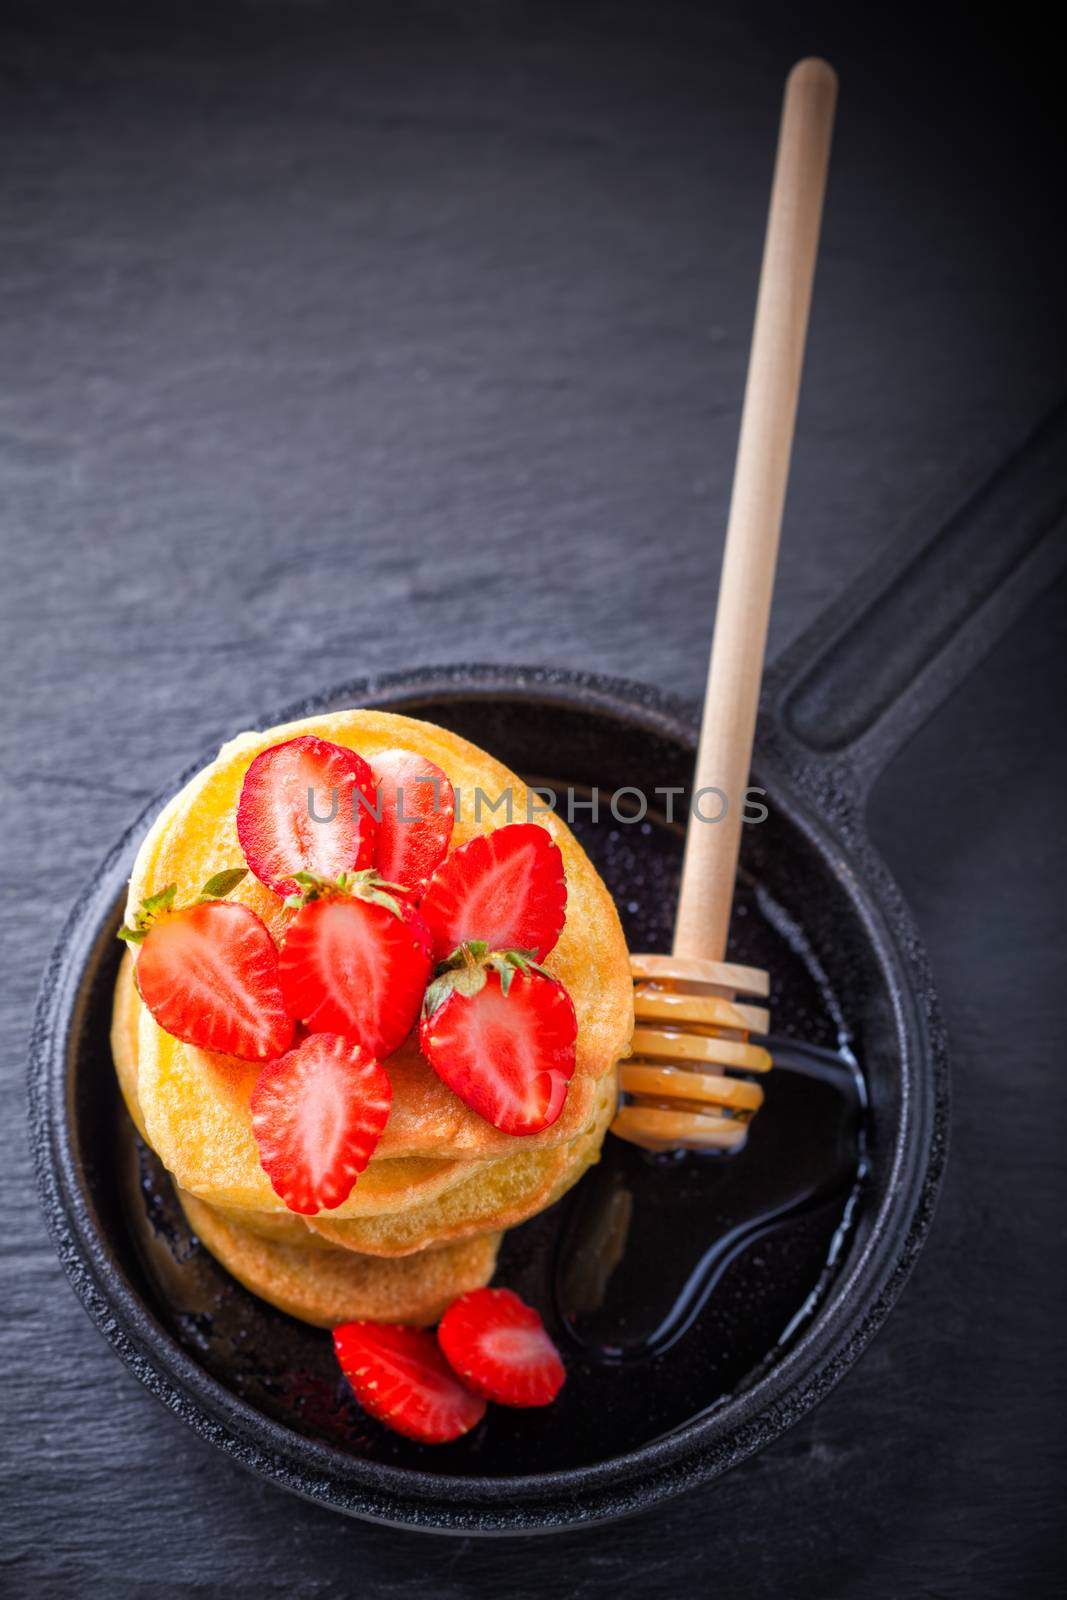 Stack of sweet pancakes with strawberry and honey. by supercat67